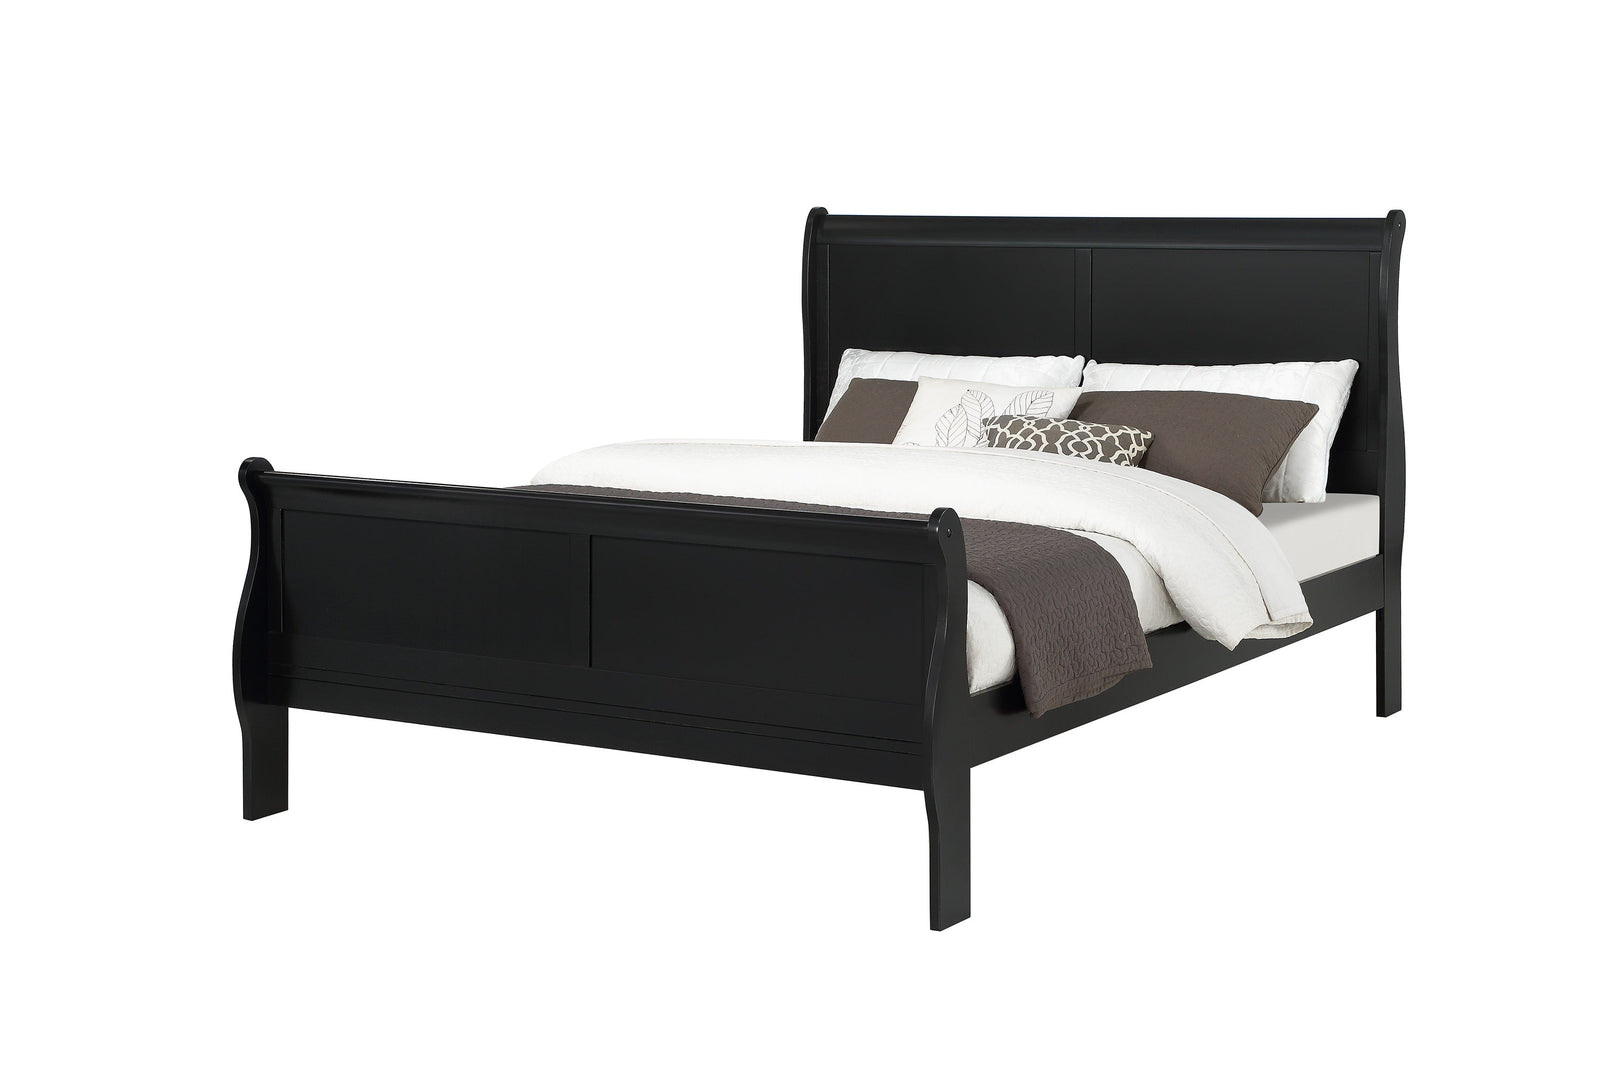 Louis Philip Black Classic And Modern Wood Full Sleigh Bed